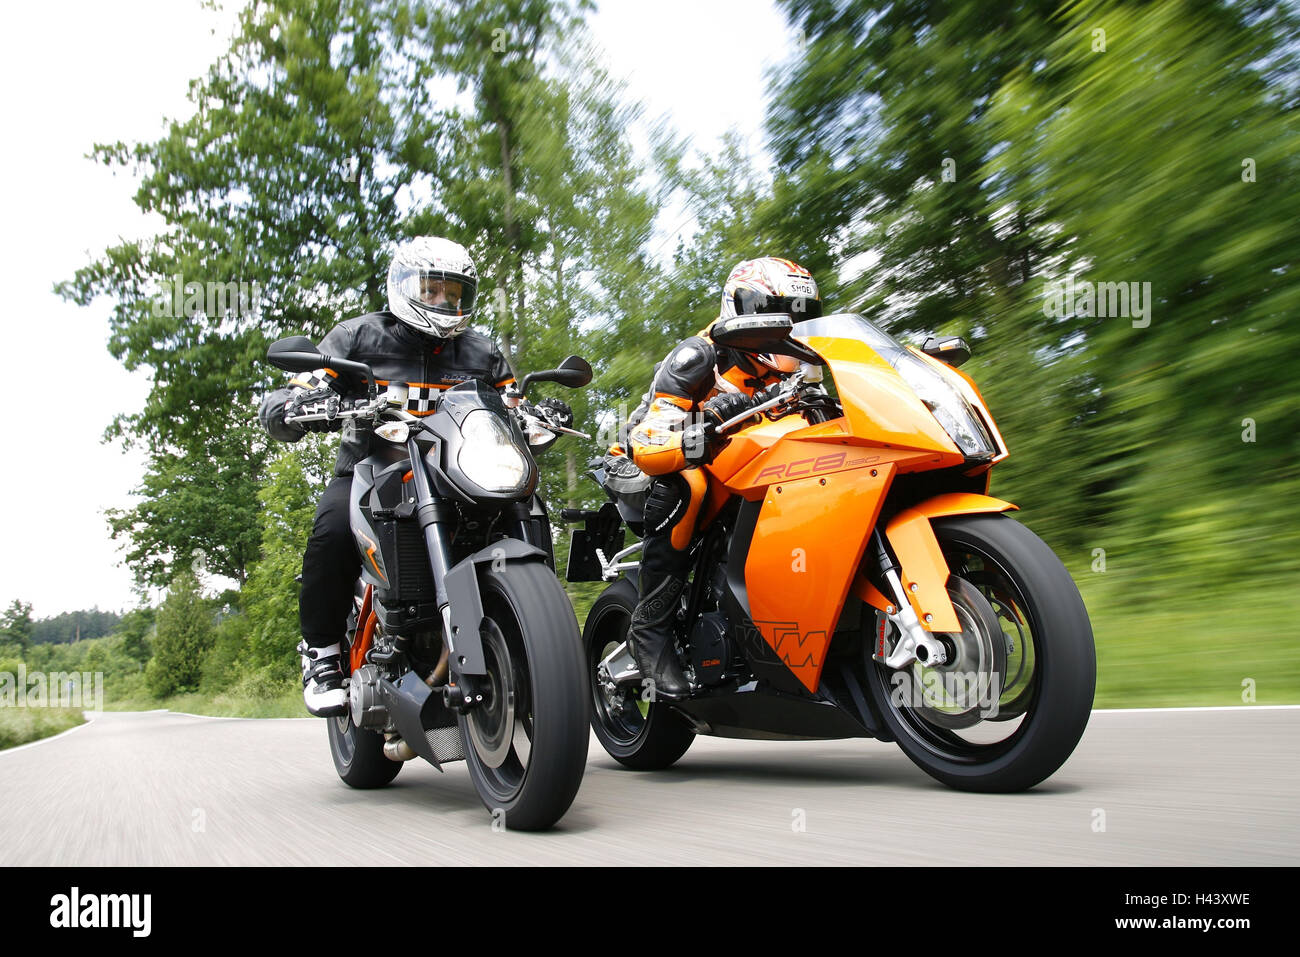 Street, motorcyclist, two, side by side, Stock Photo